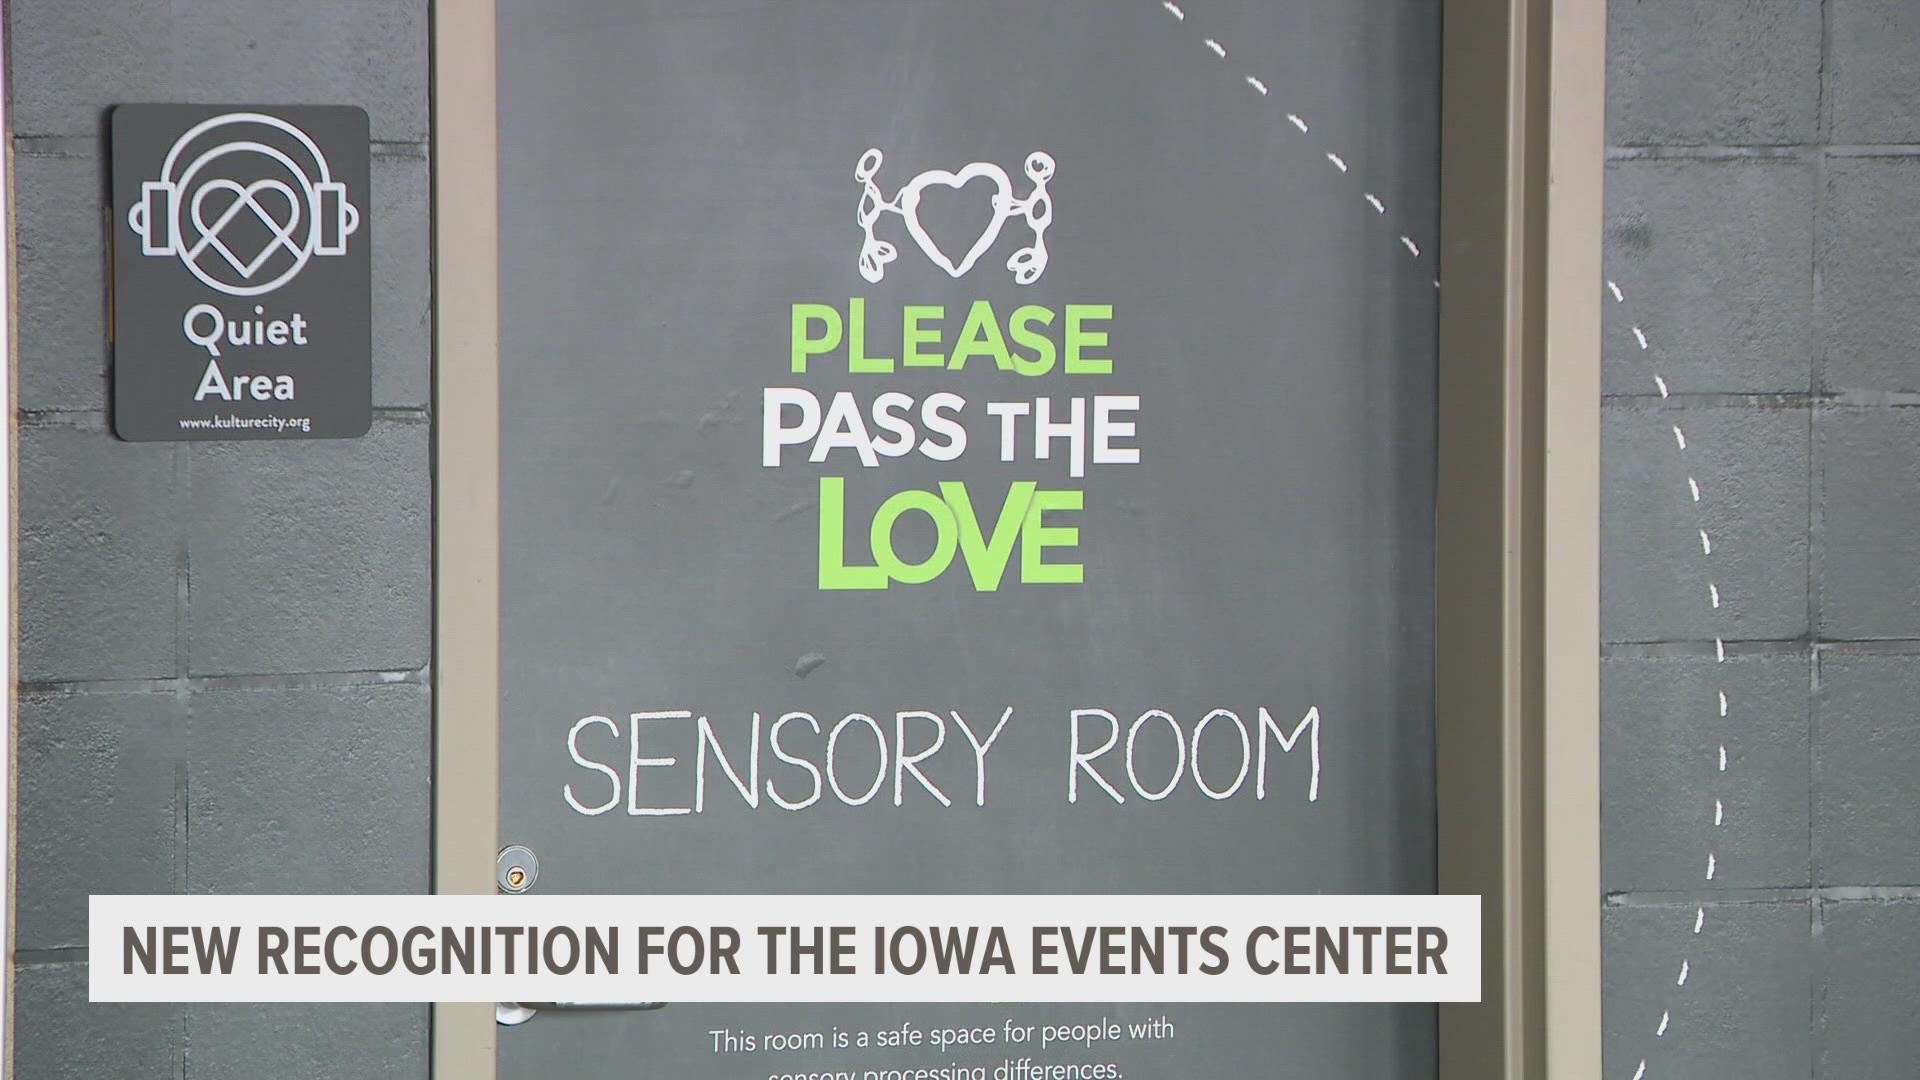 The room at the venue has different sensory features for those who have invisible disabilities like autism, PTSD or dementia.